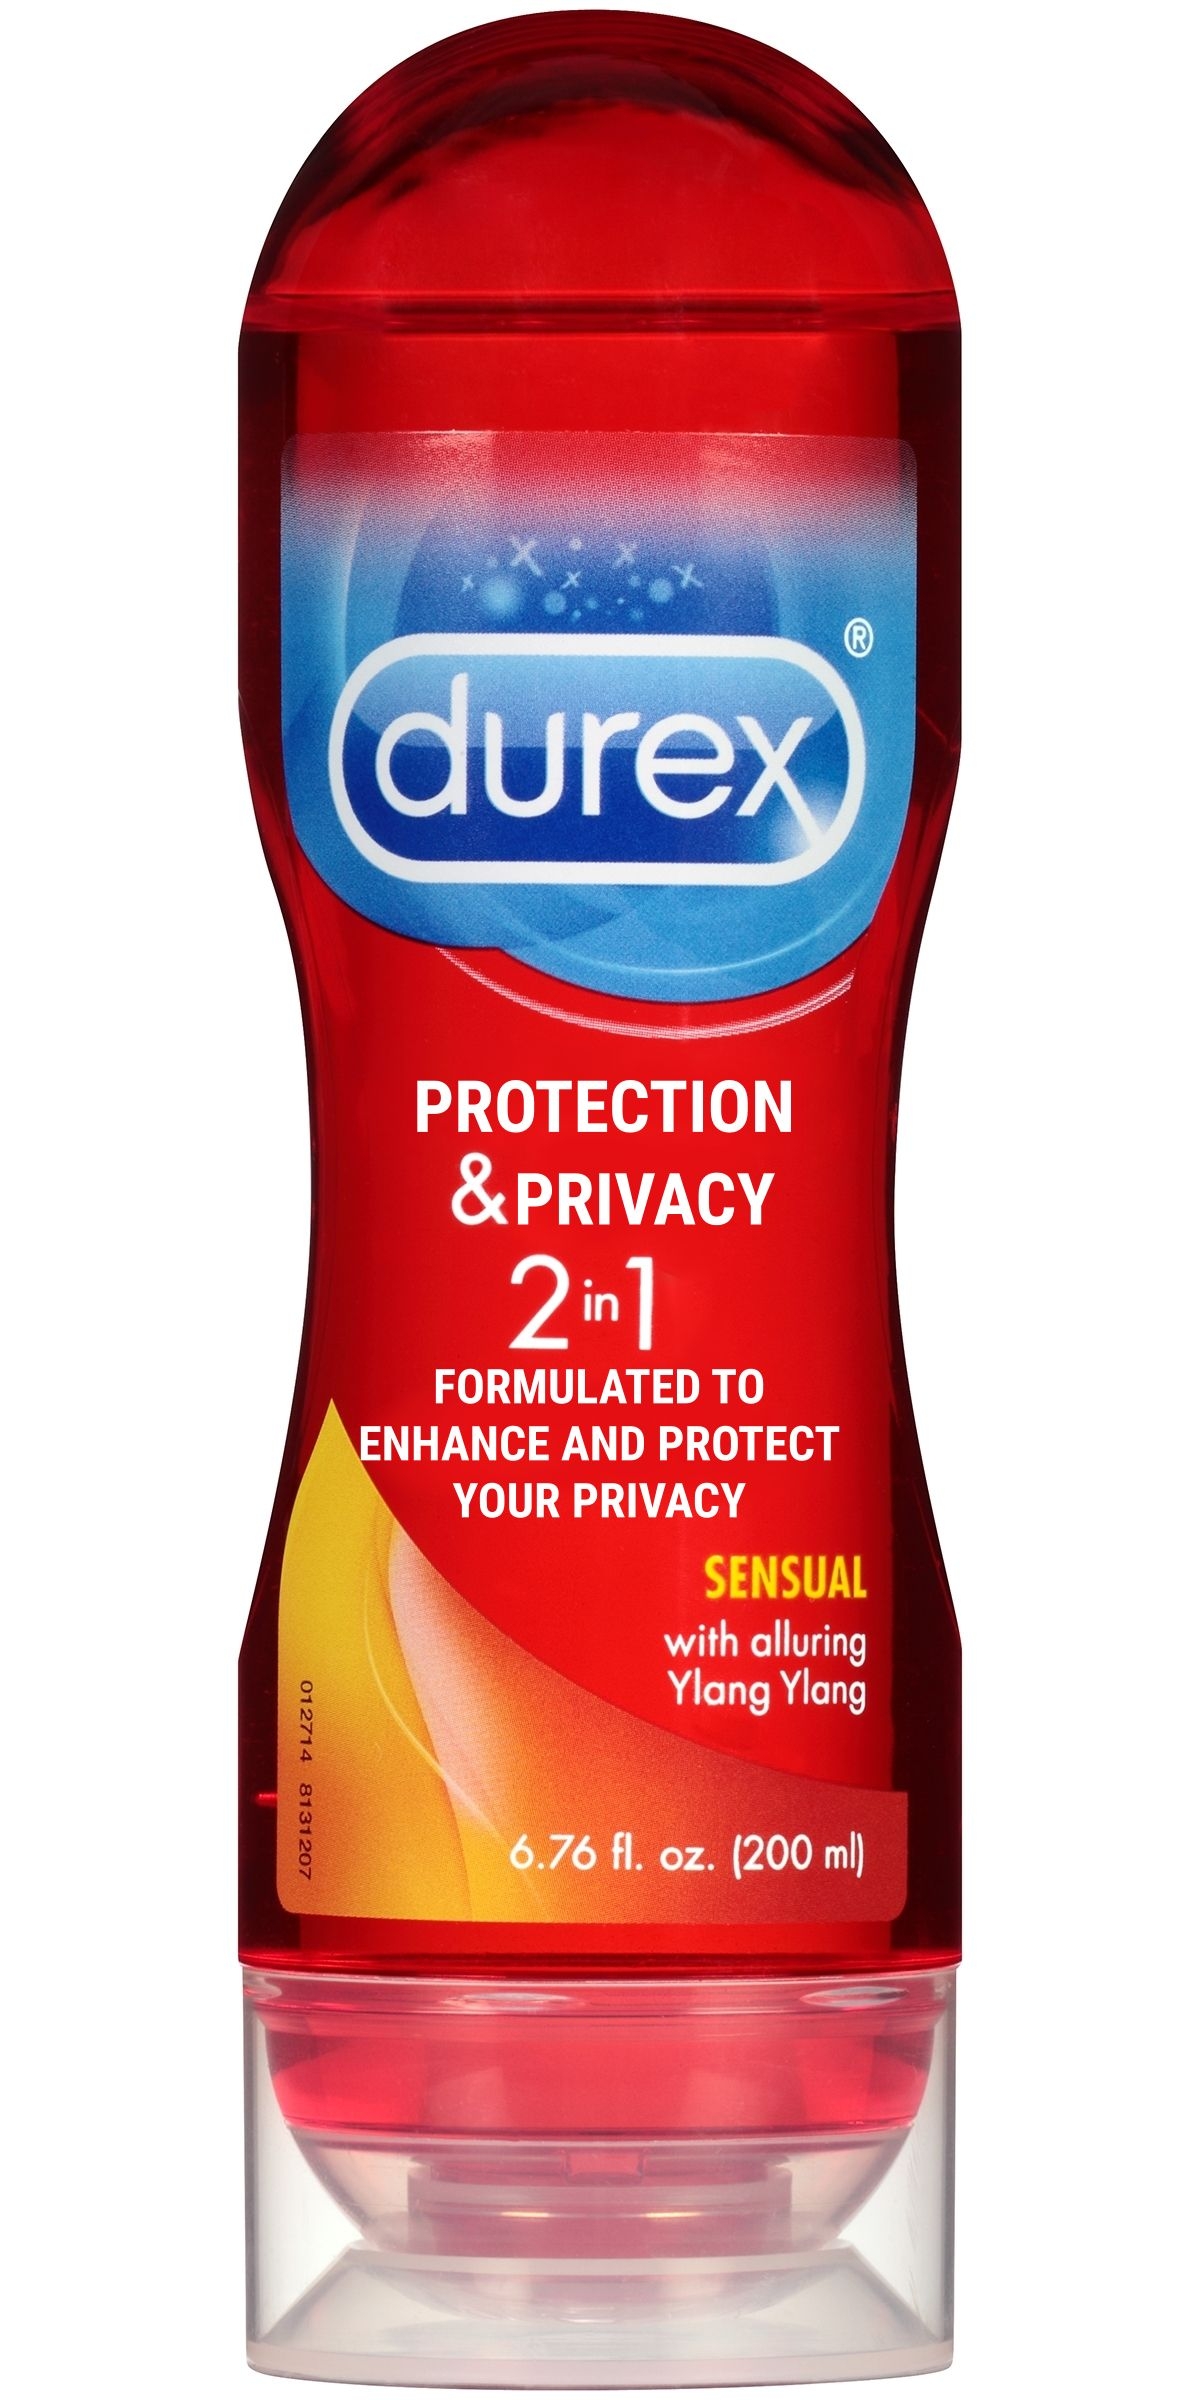 Privacy protection